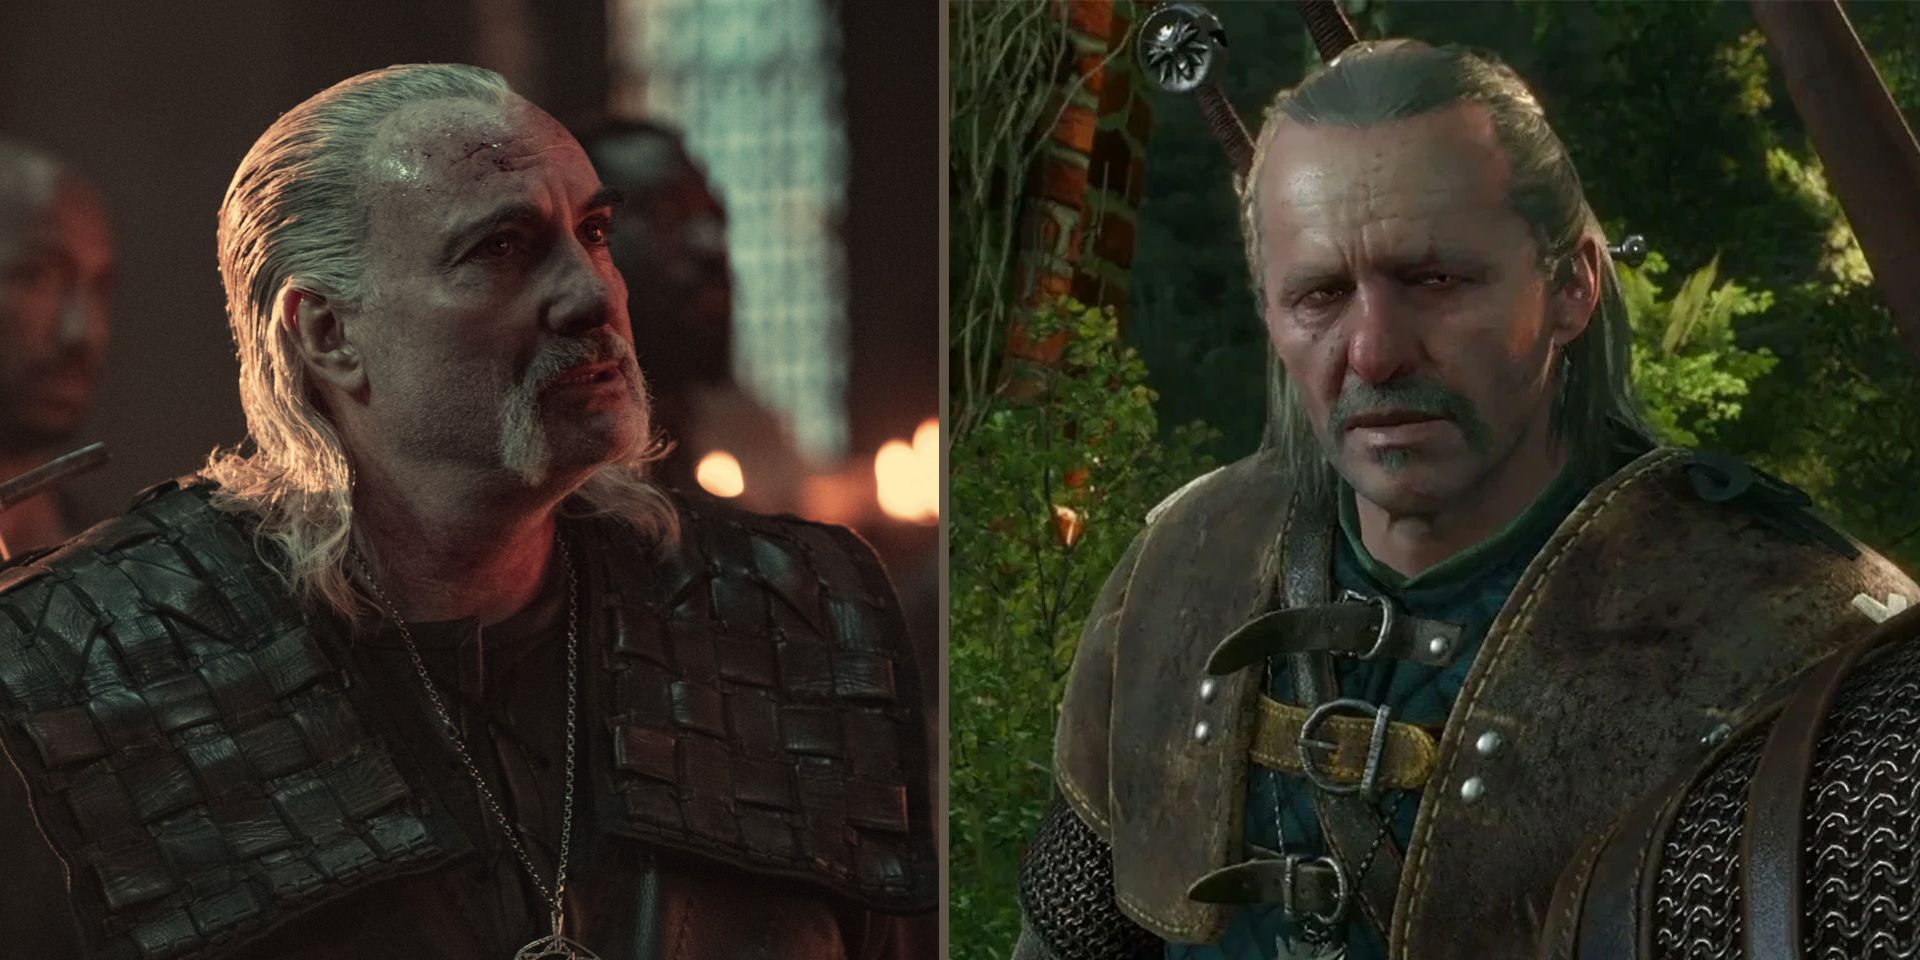 witcher-character-compare-game-netflix-show-vesemir